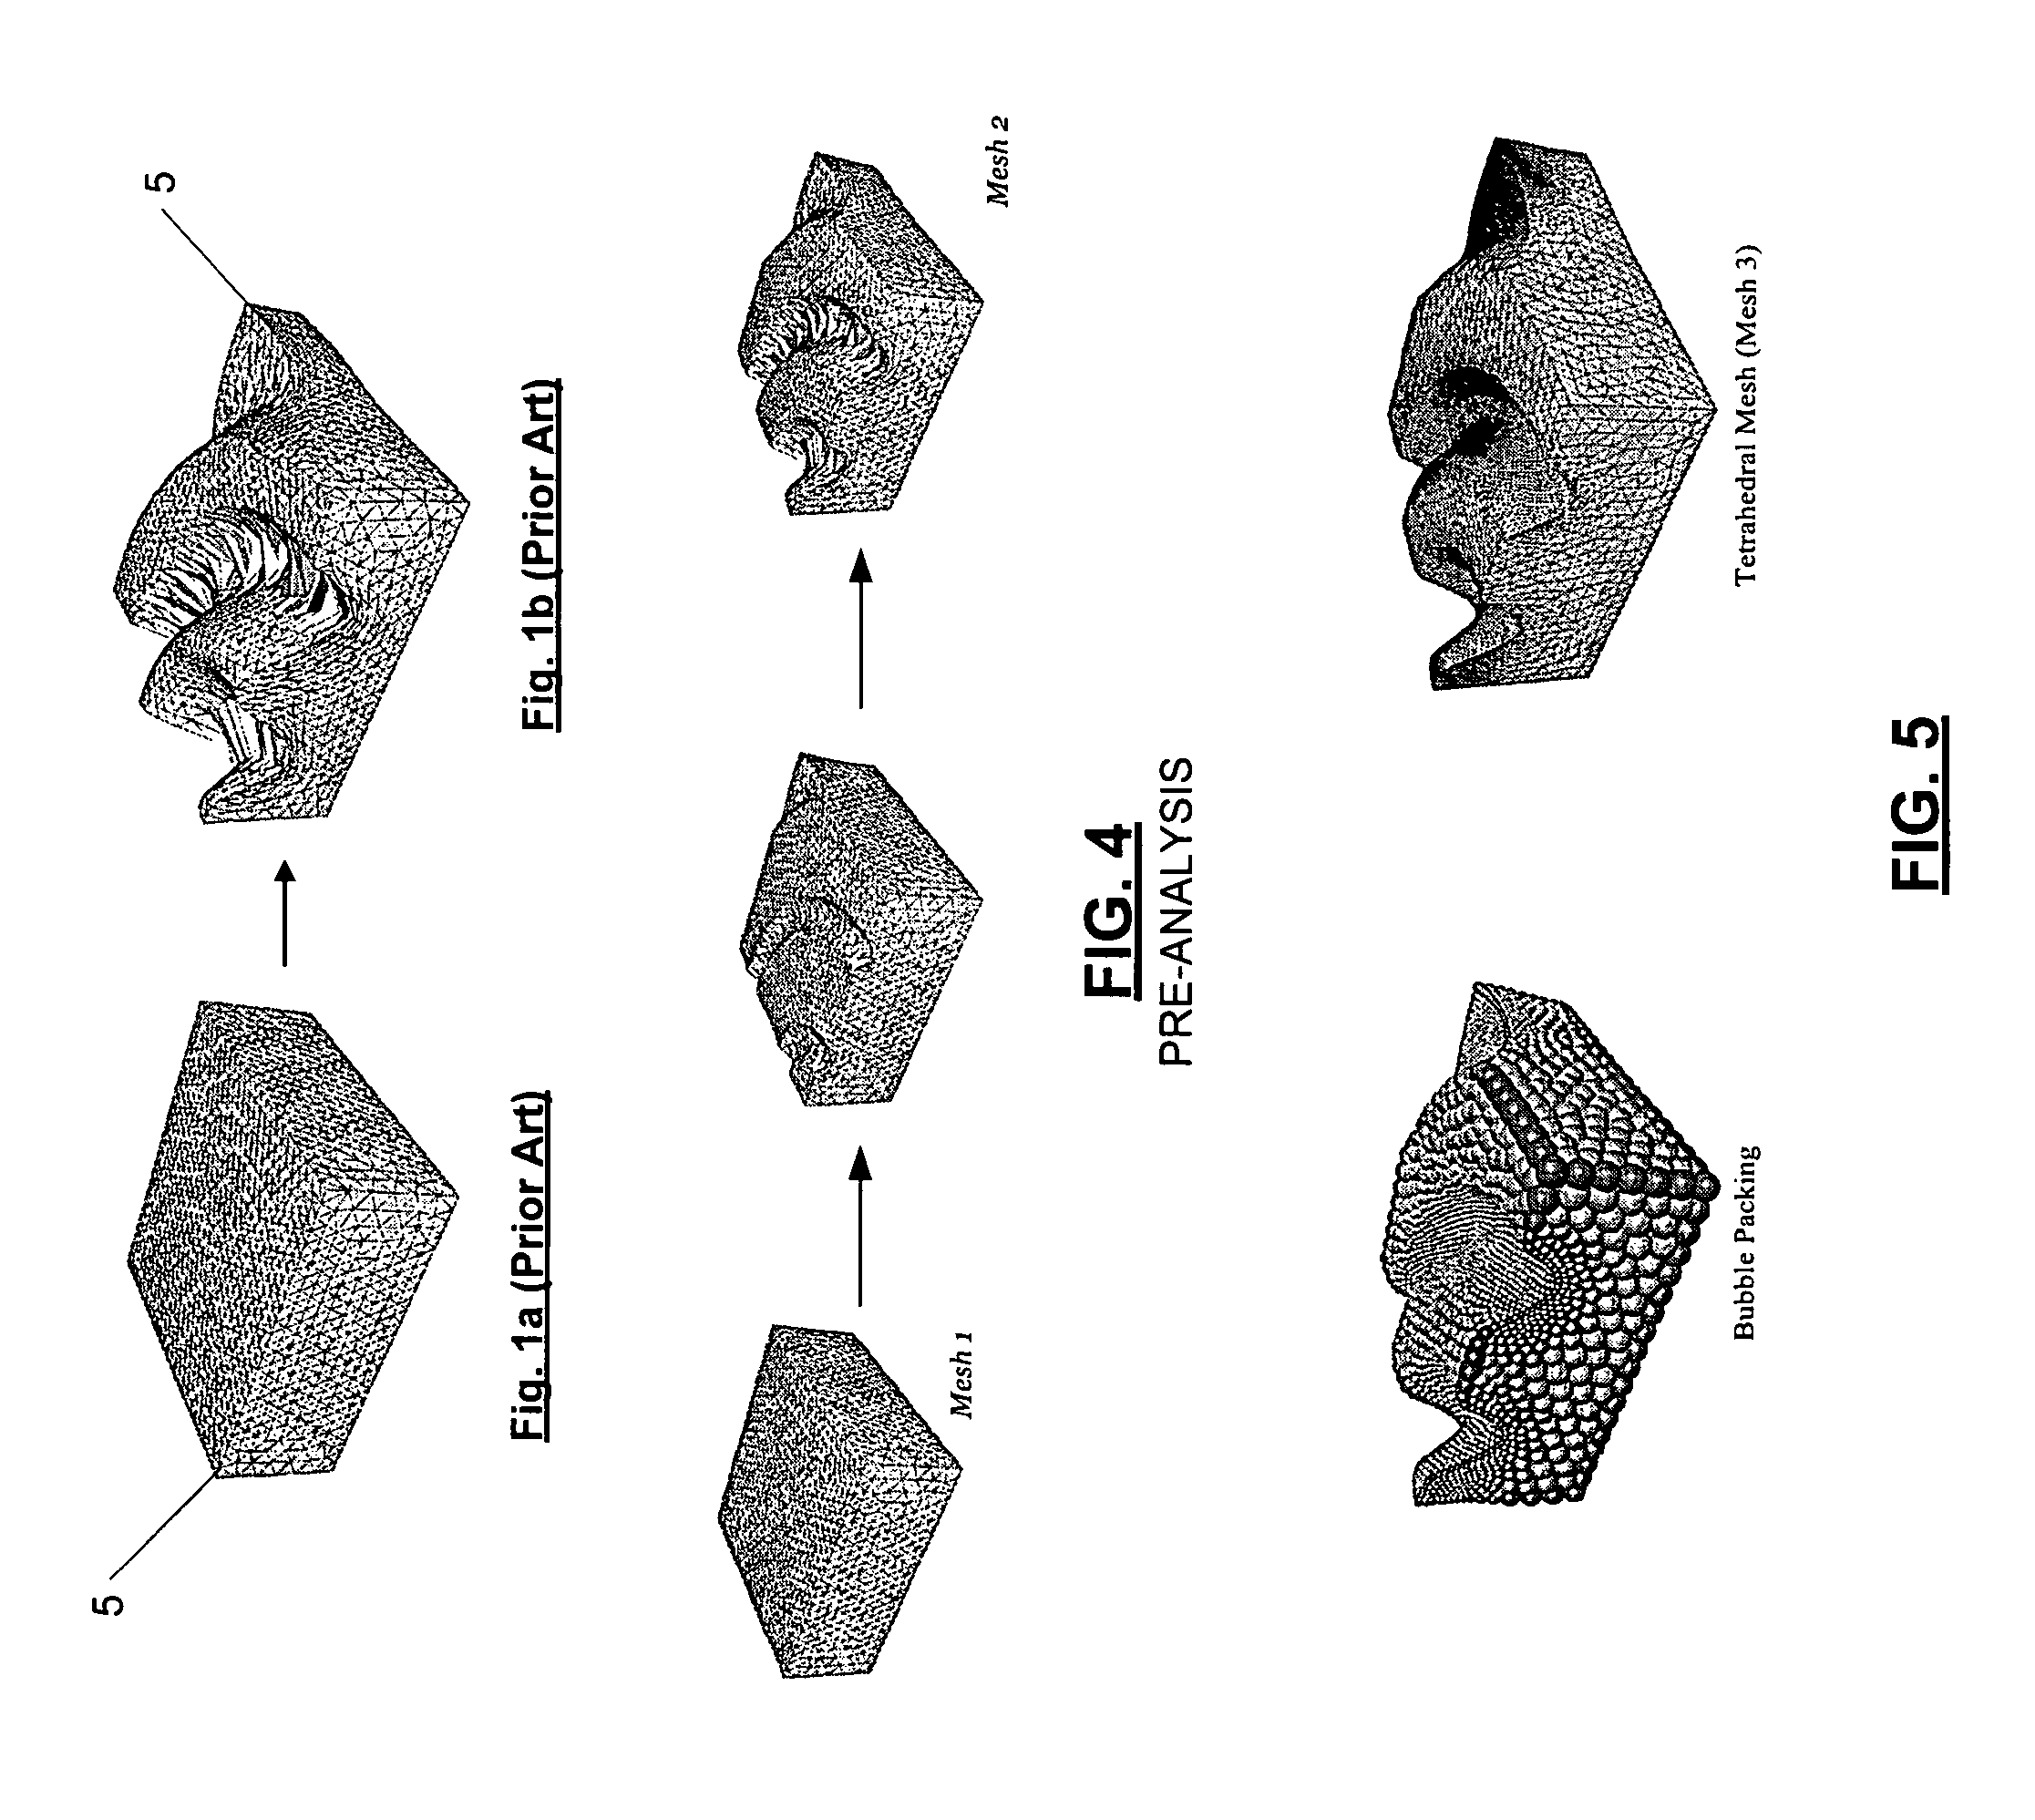 System and method for deformation analysis using inverse pre-deformation of finite element mesh